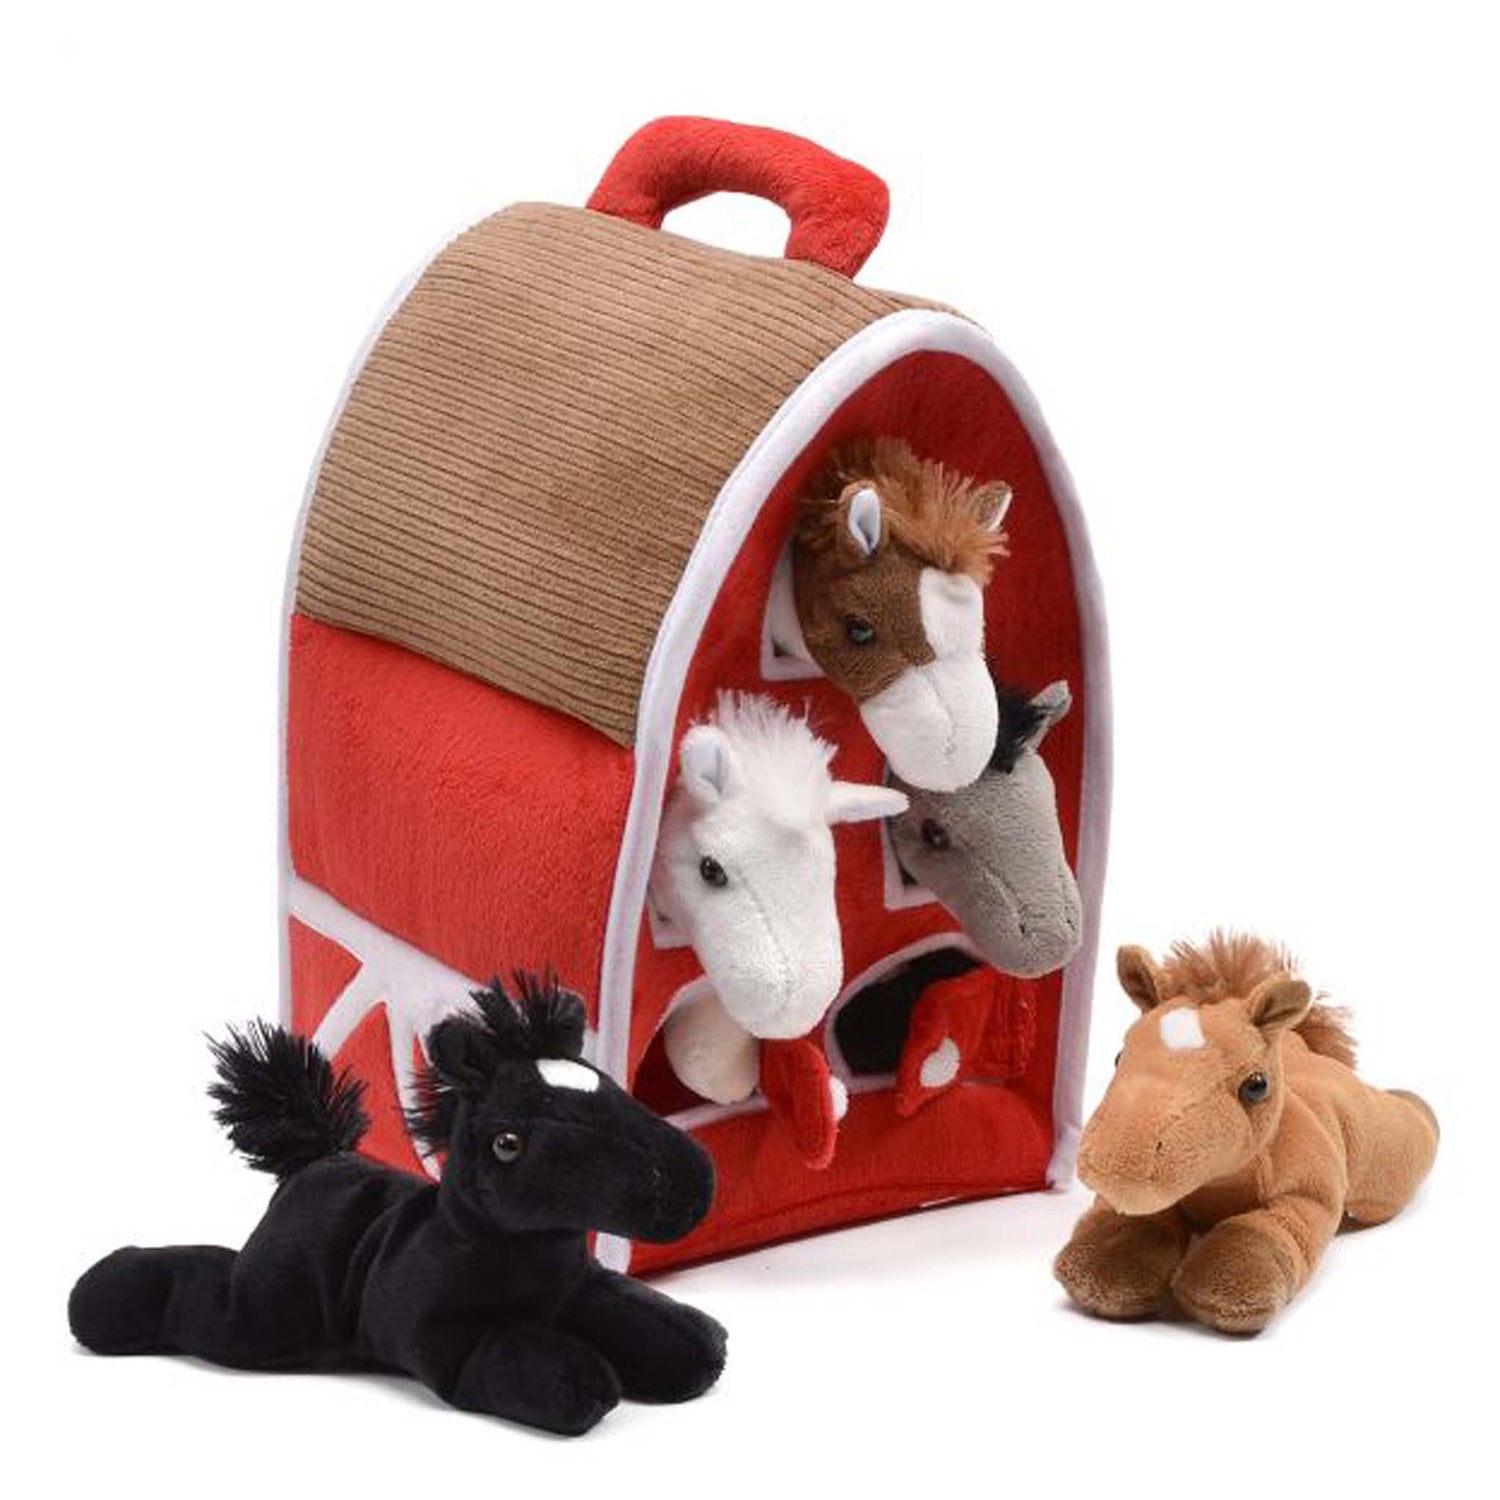 Plush Red Horse Barn With 5 Stuffed Animals